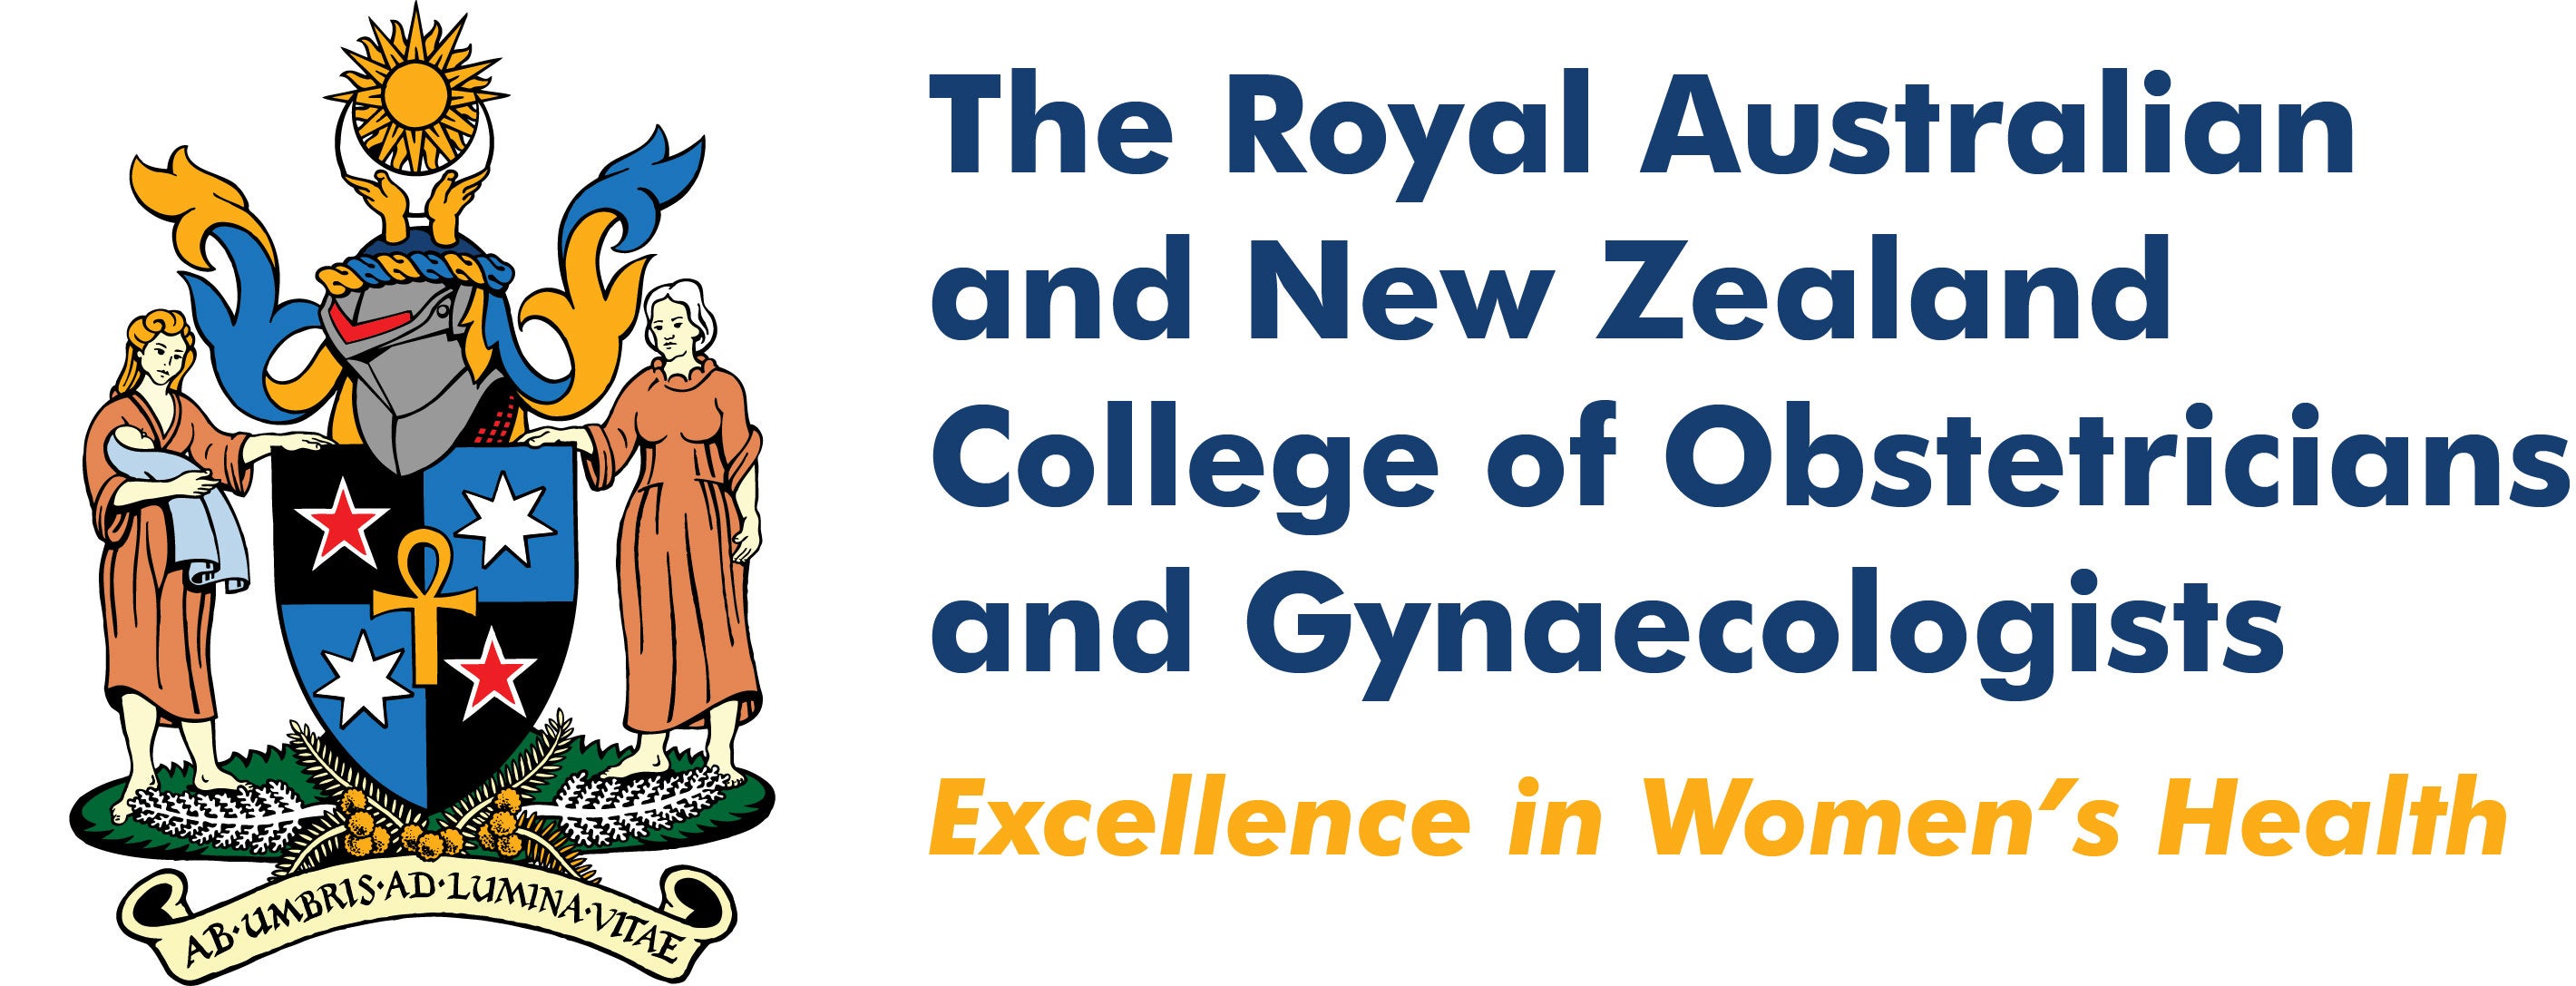 The Rotal Australian and New Zealand College of Obstetricians and Gynaecologists